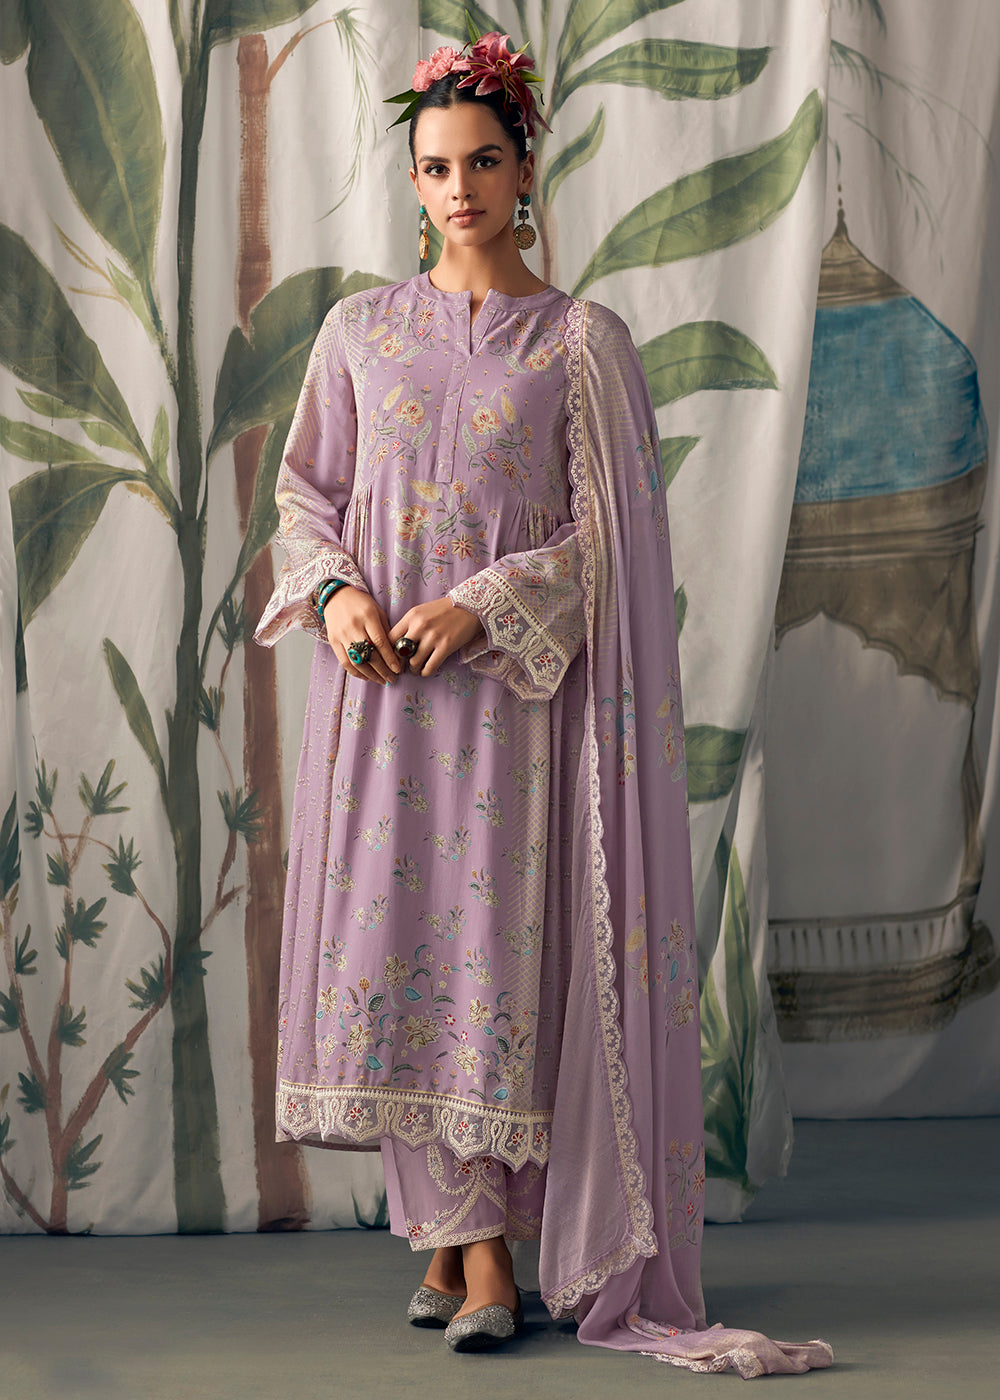 Buy Now Lavender Pure Maslin Cotton Digital Printed Salwar Suit Online in USA, UK, Canada, Germany, Australia & Worldwide at Empress Clothing.